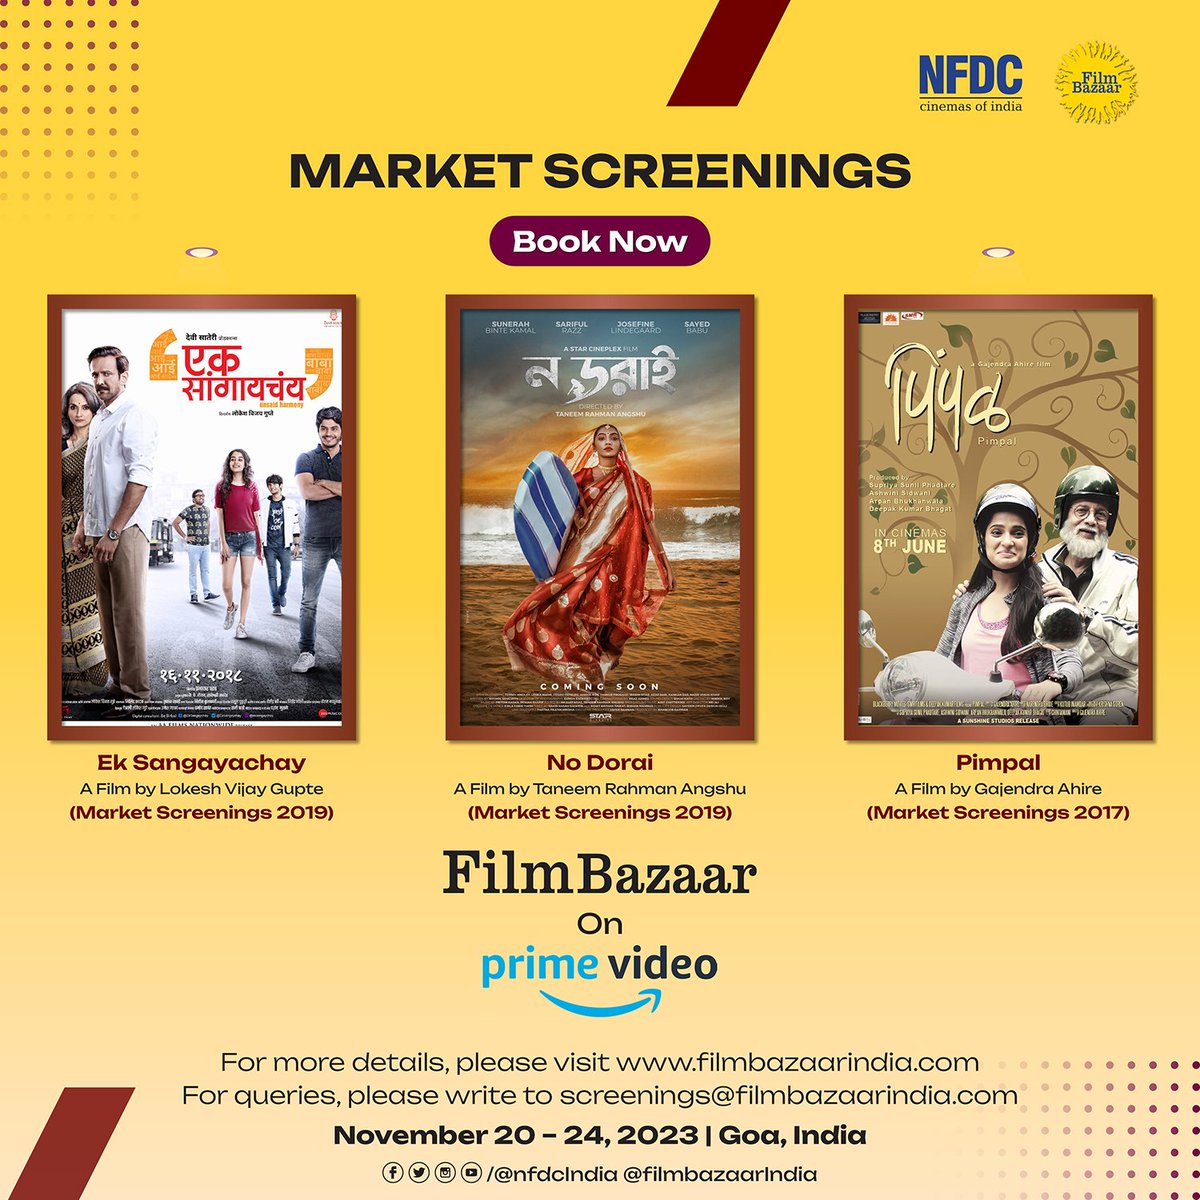 Have you booked a SLOT yet? Deadlines approaching soon for #MARKETSCREENINGS. Book now and get your film viewed by a wide variety of audiences: international distributors, aggregators, producers, film festival programmers. Visit filmbazaarindia.com. #NFDC #FilmBazaarIndia